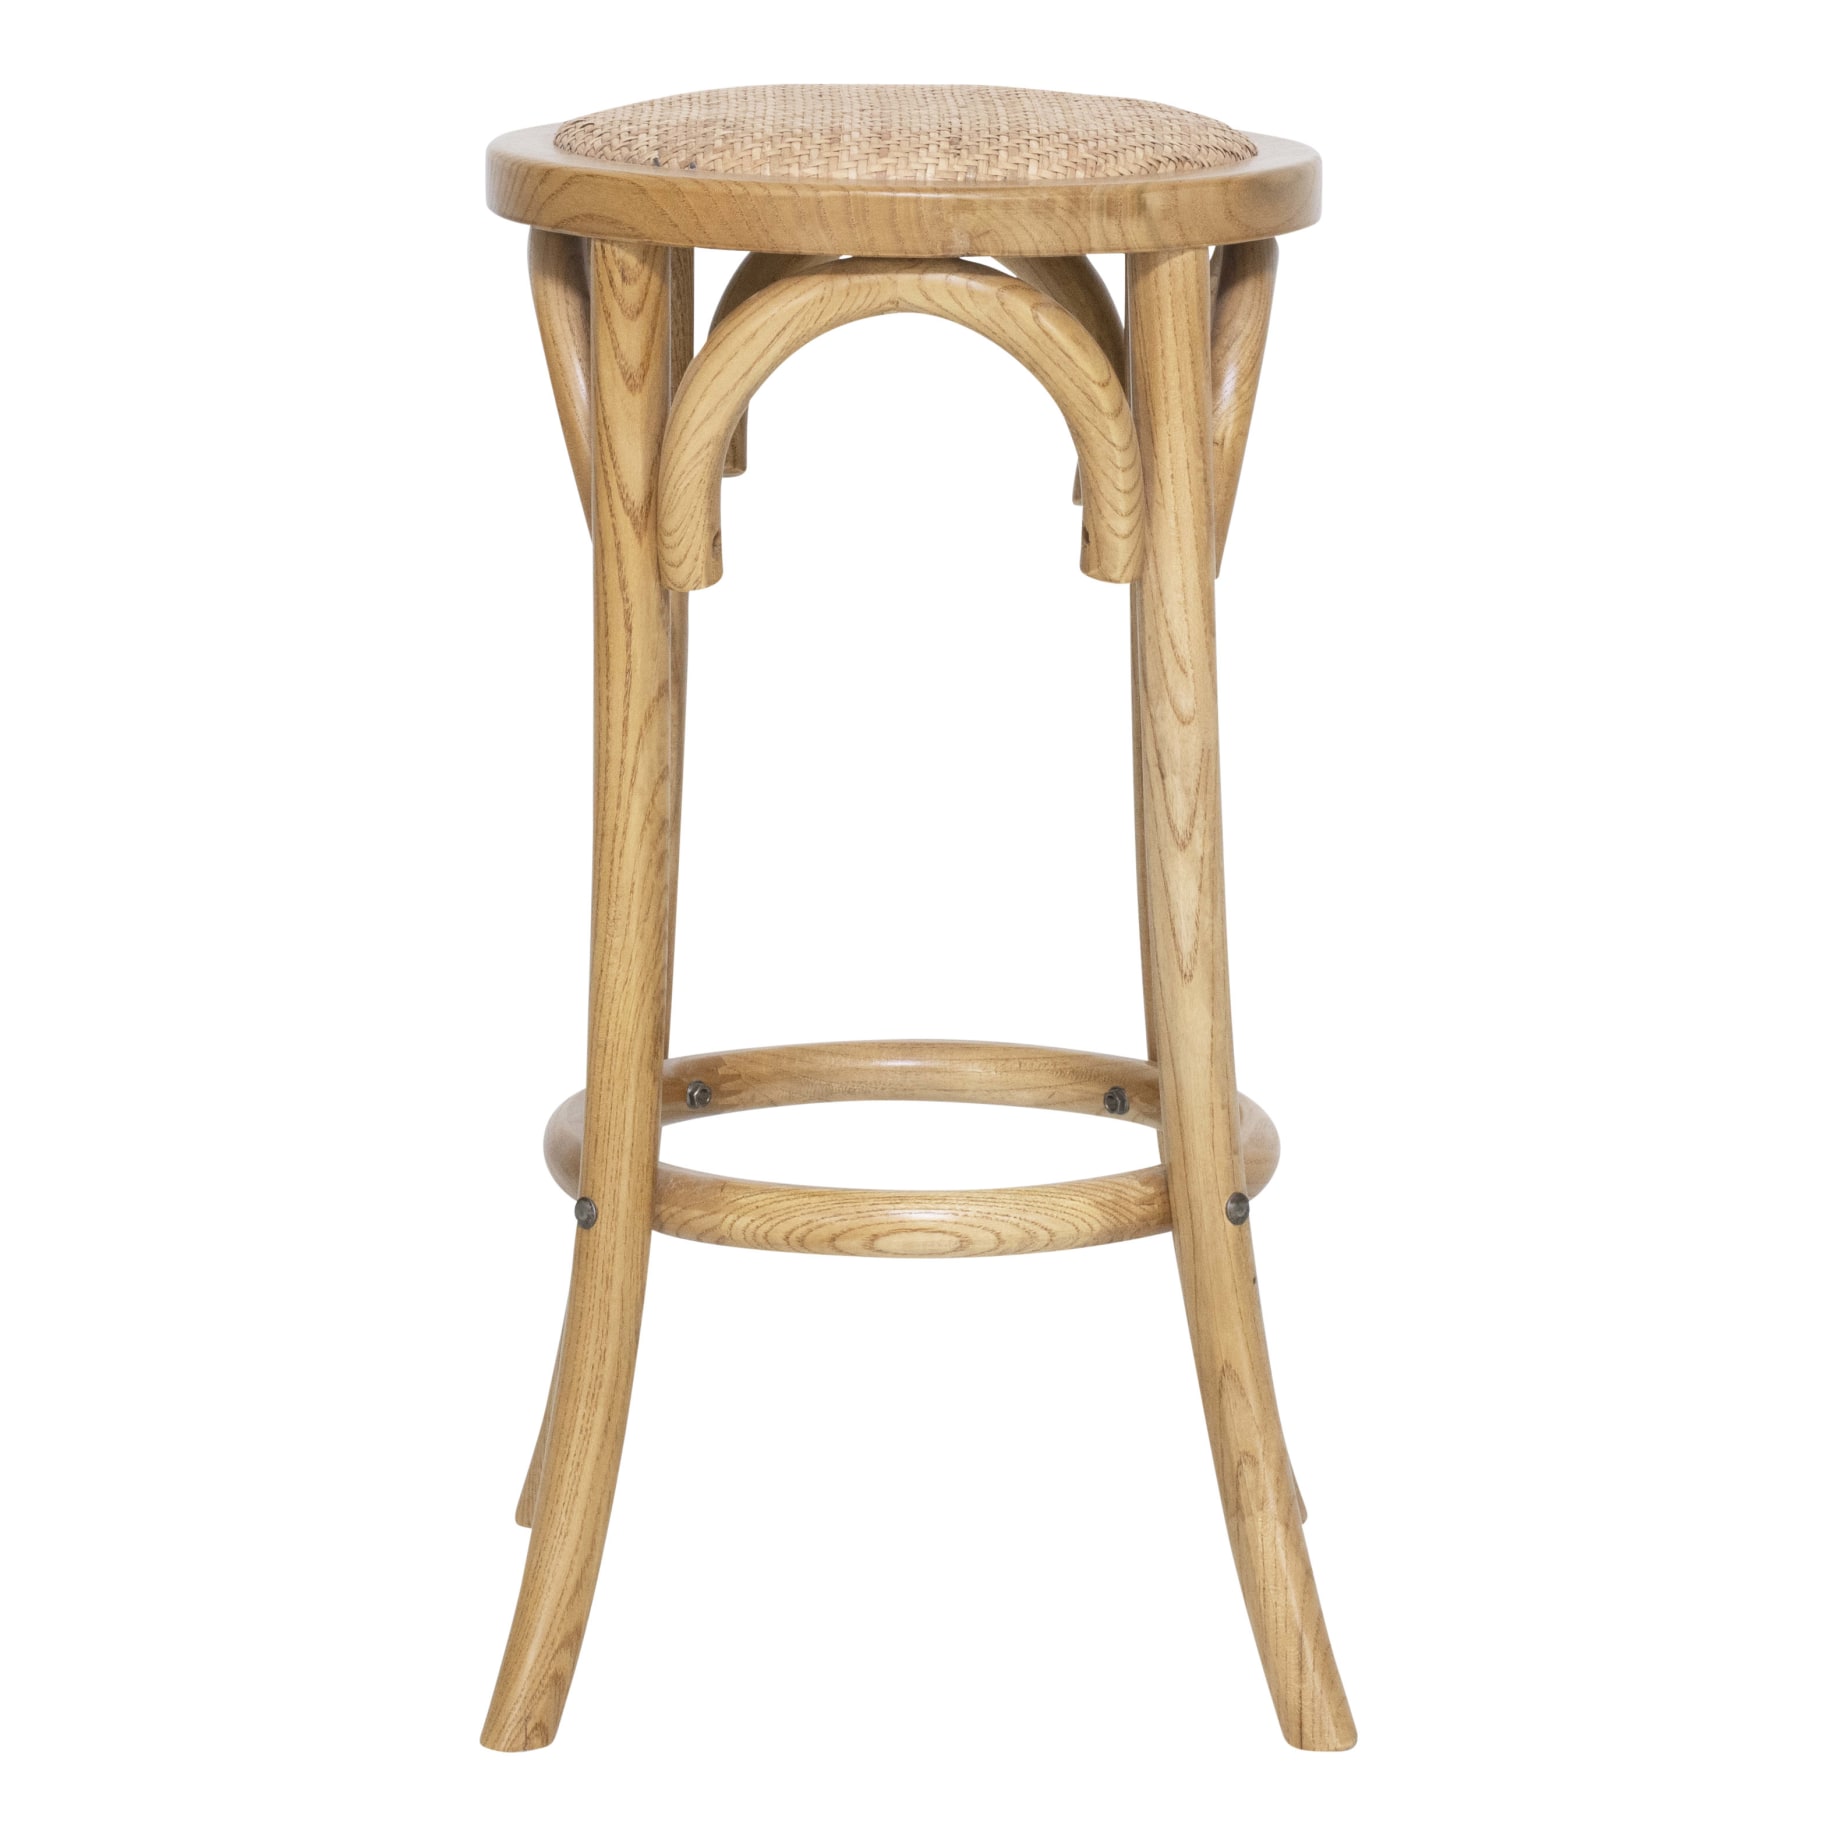 Cristo Stool in Weathered Natural Oak Stain / Rattan